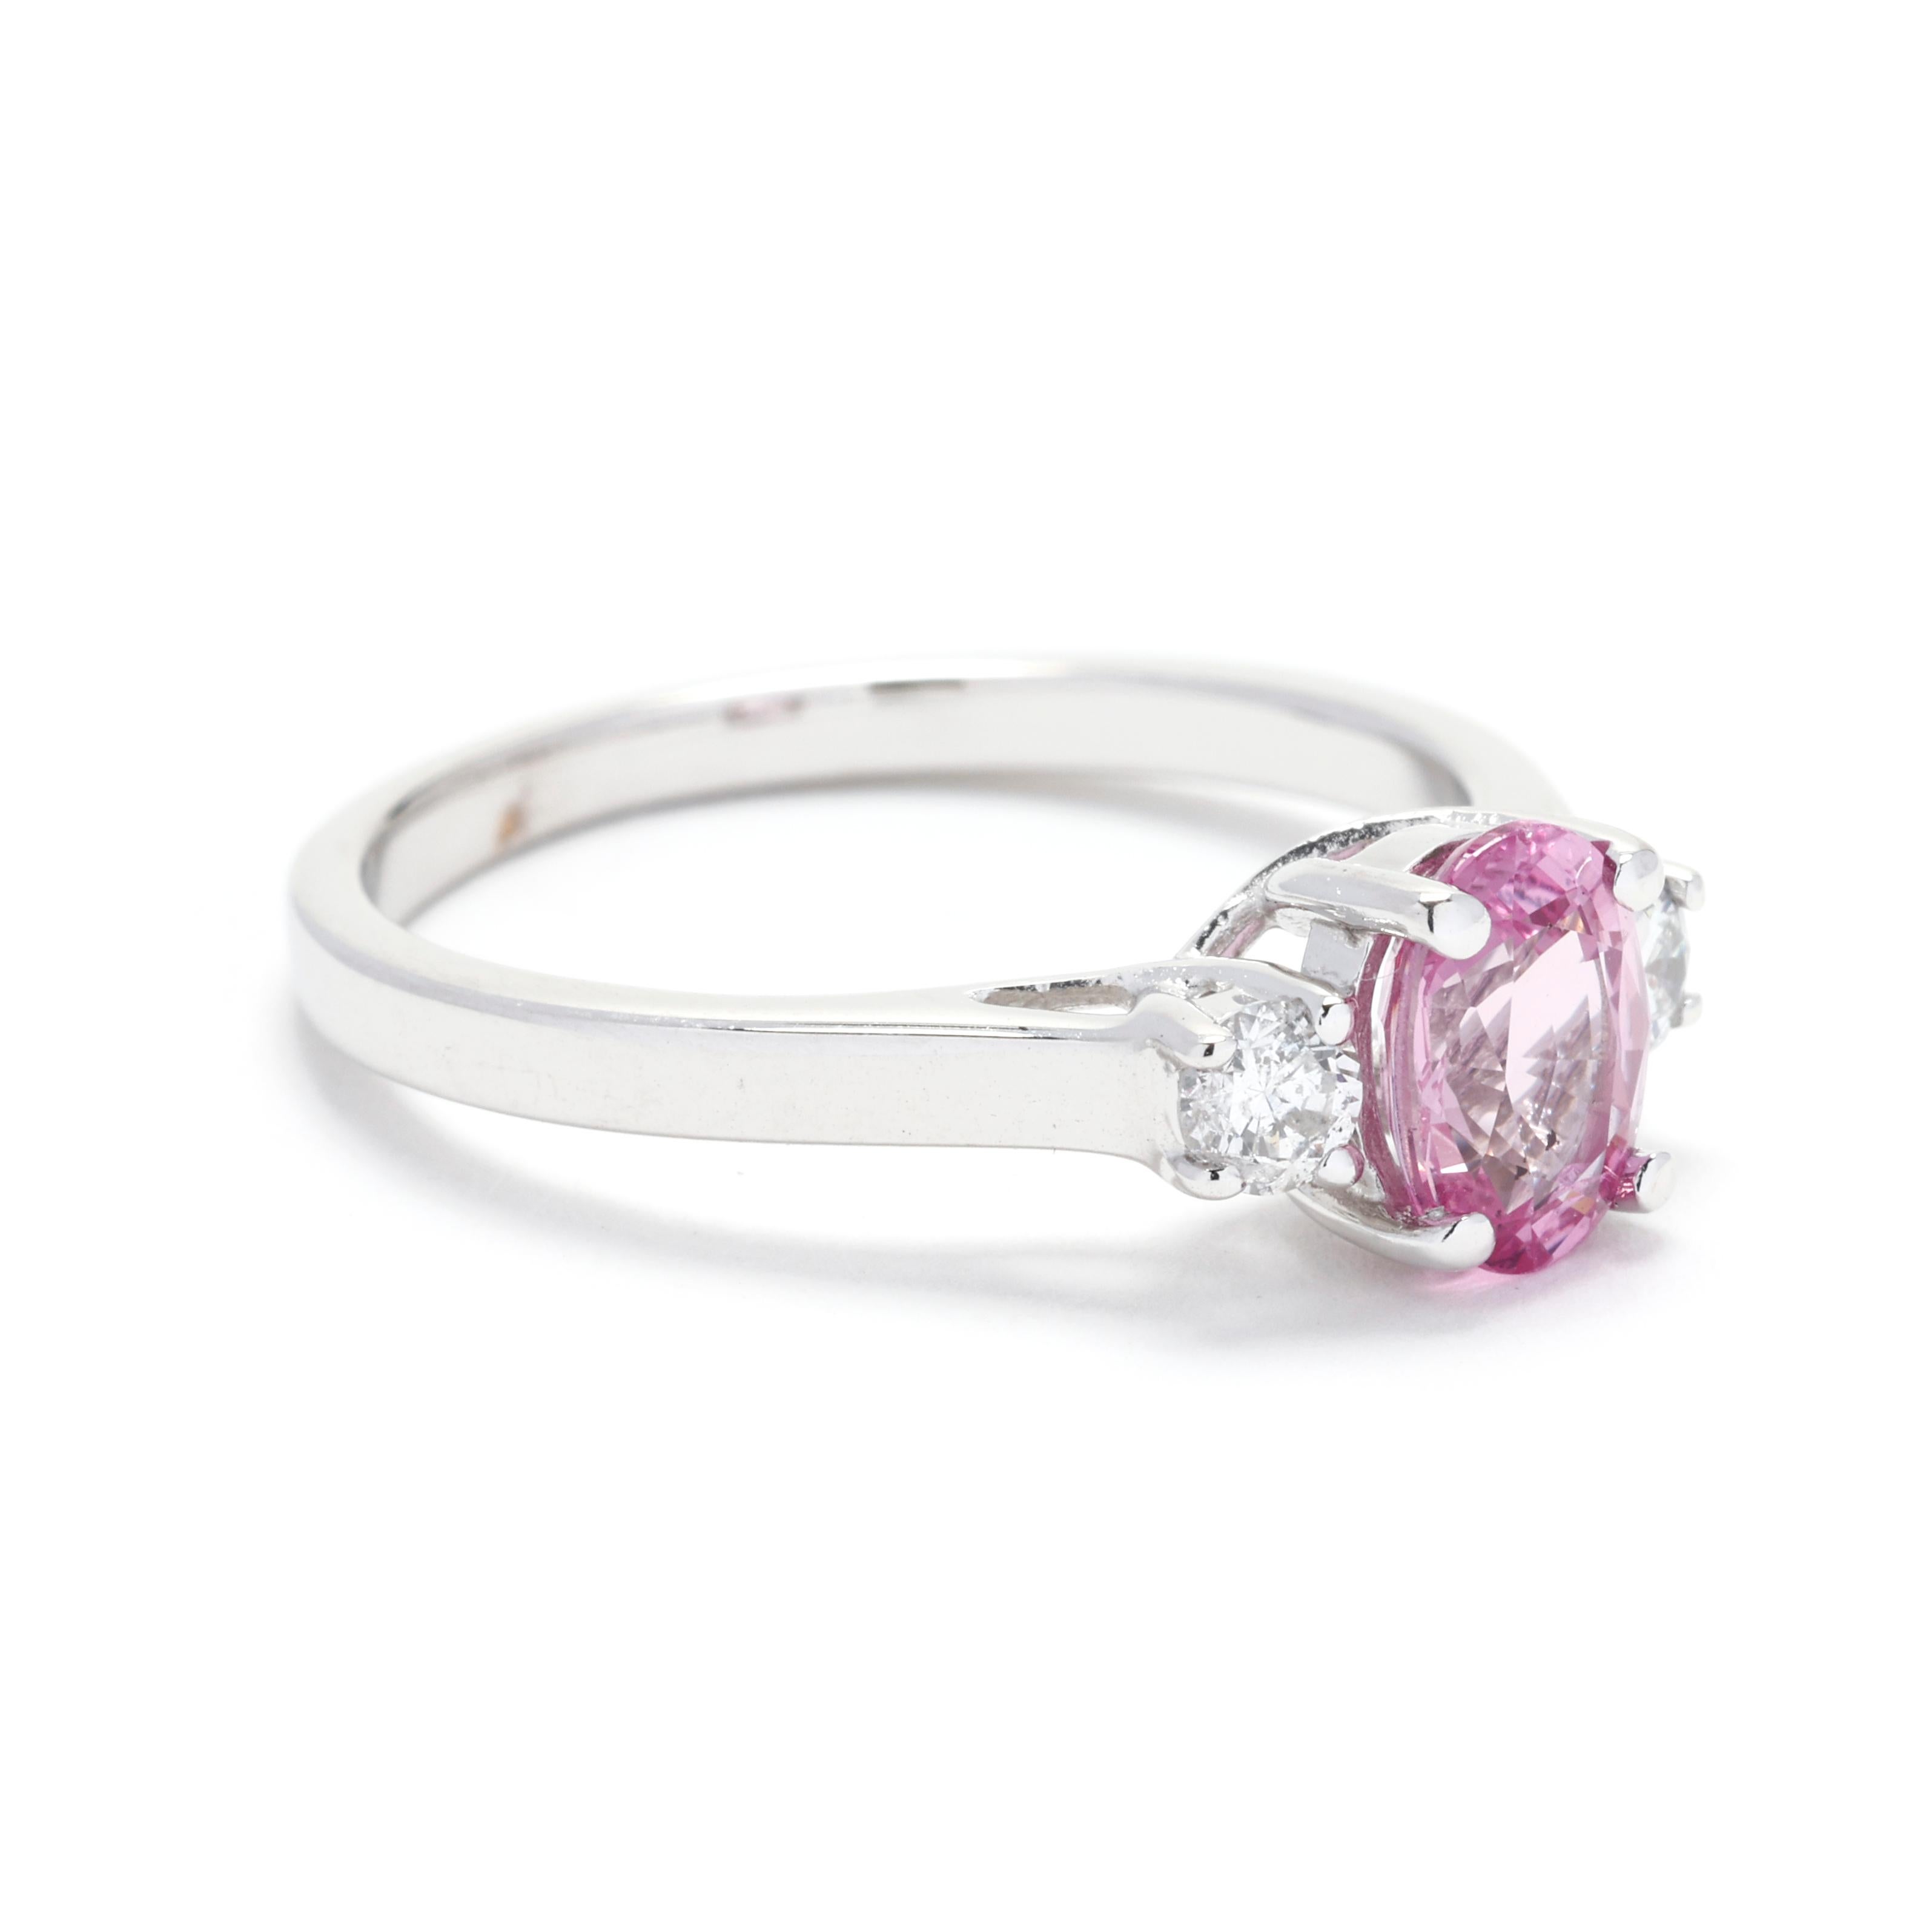 Make a statement with this exquisite 1.36ctw Diamond and Pink Sapphire 3 Stone Ring. Expertly crafted in 14k white gold, this stunning ring features a trio of dazzling round brilliant diamonds accented by vibrant pink sapphires, creating a